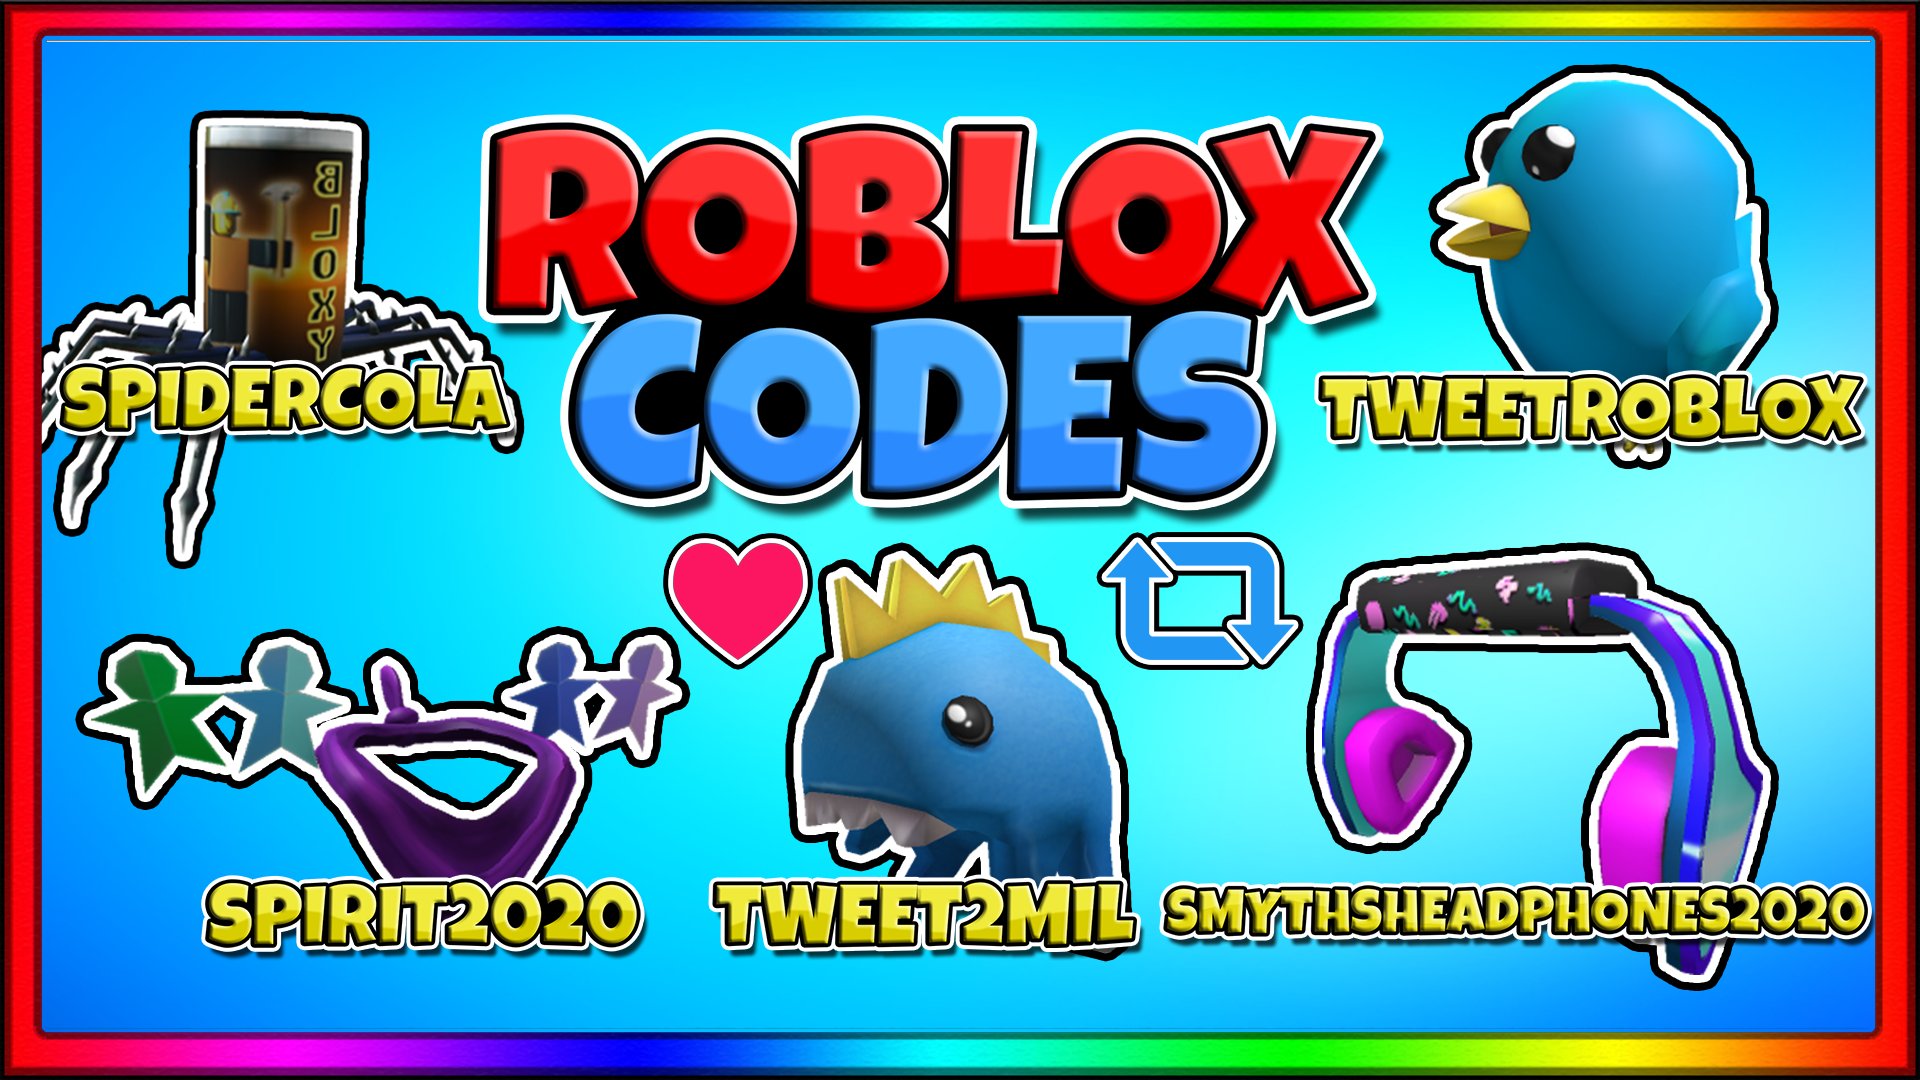 All Roblox promo codes & how to redeem them